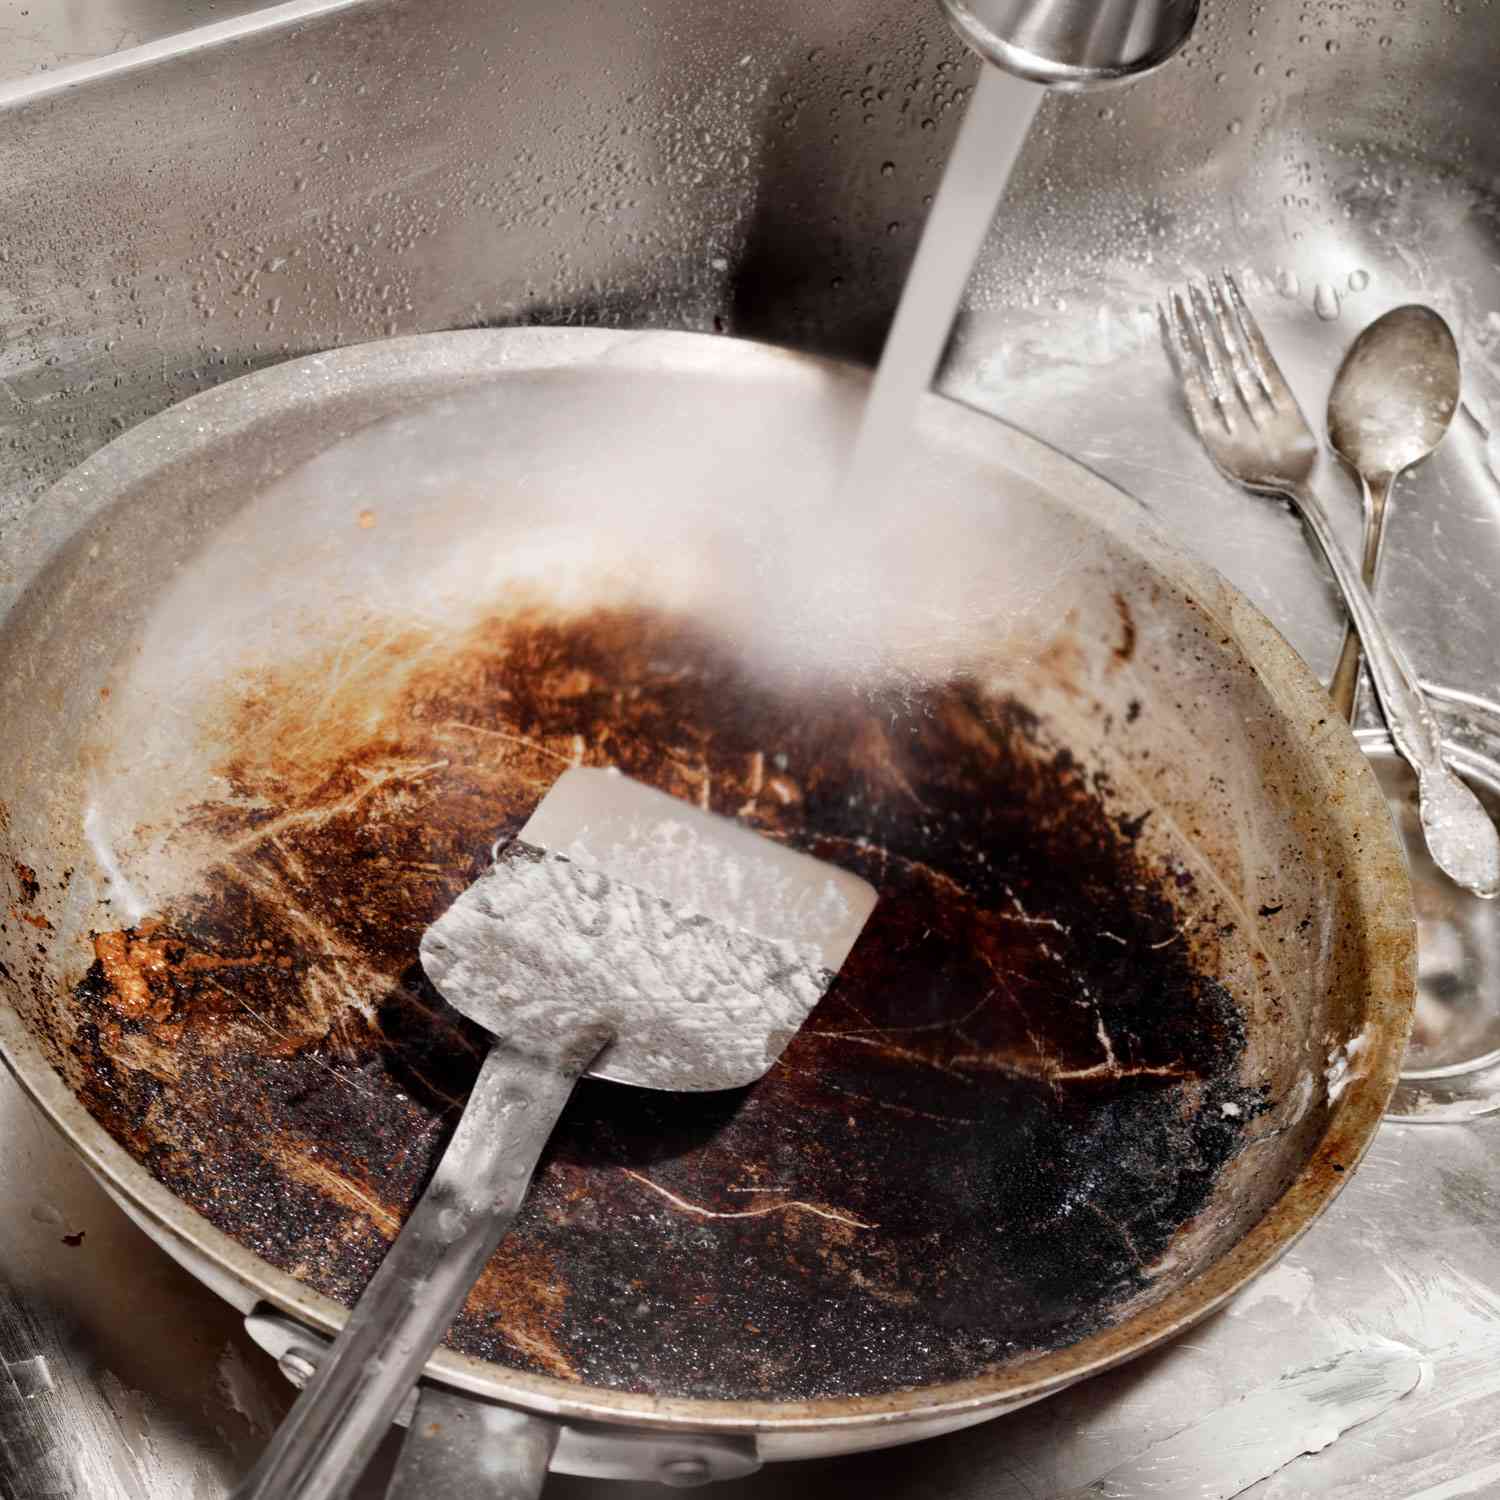 How to Clean a Burnt Pan the Right Way, According to Experts